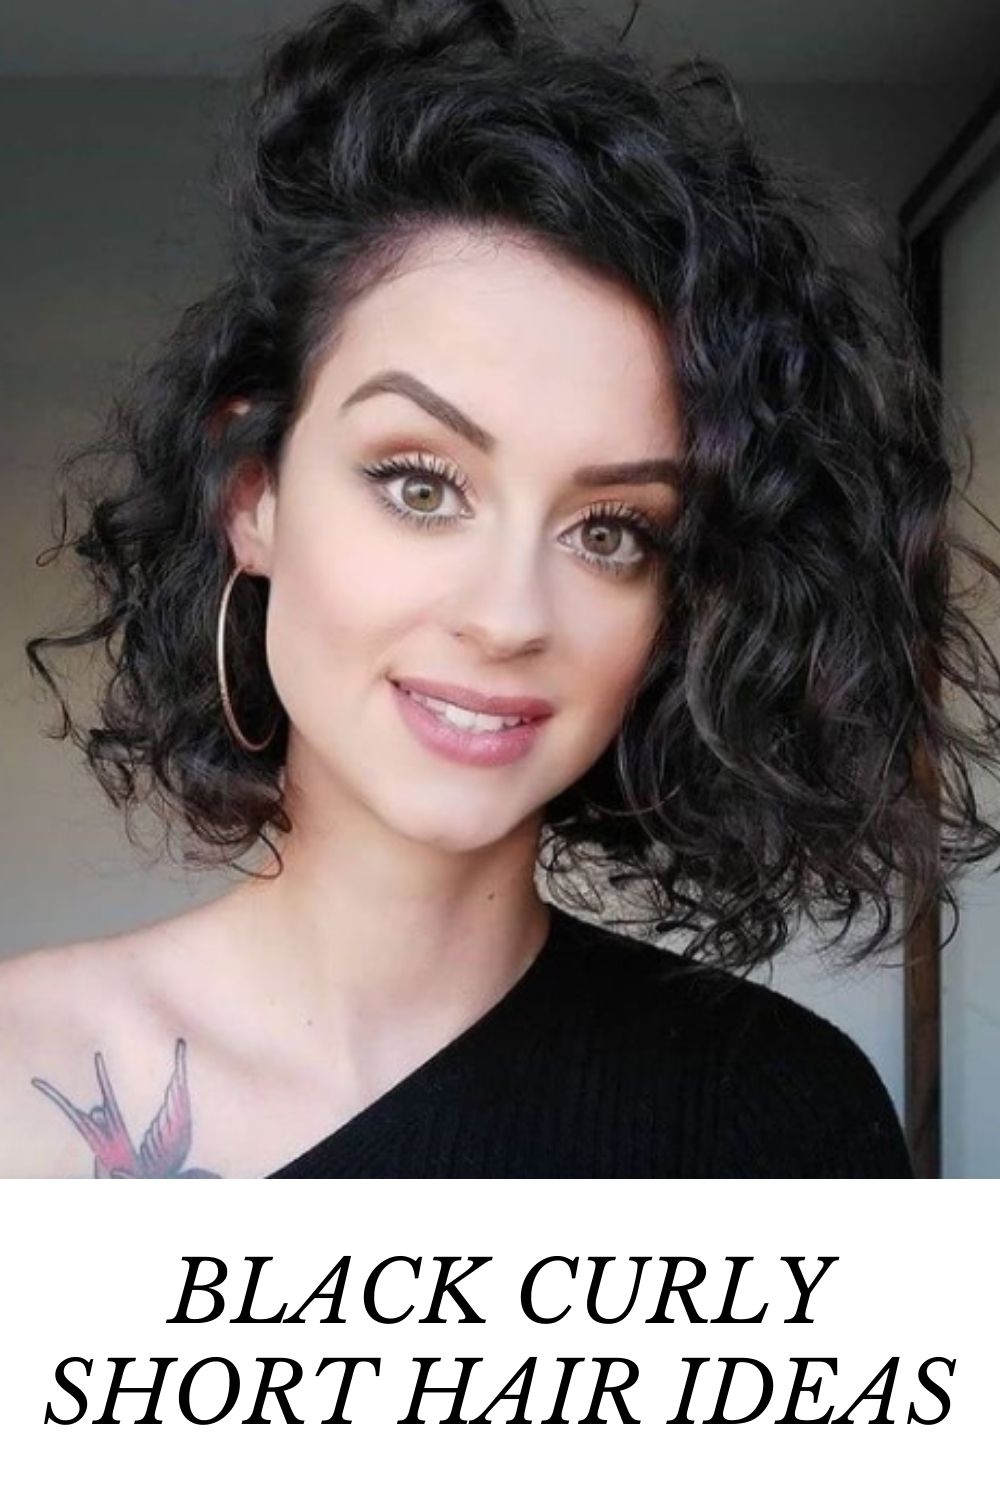 How To Get Curly Short Hair For A Woman Who Values Her Time? - Page 2 ...